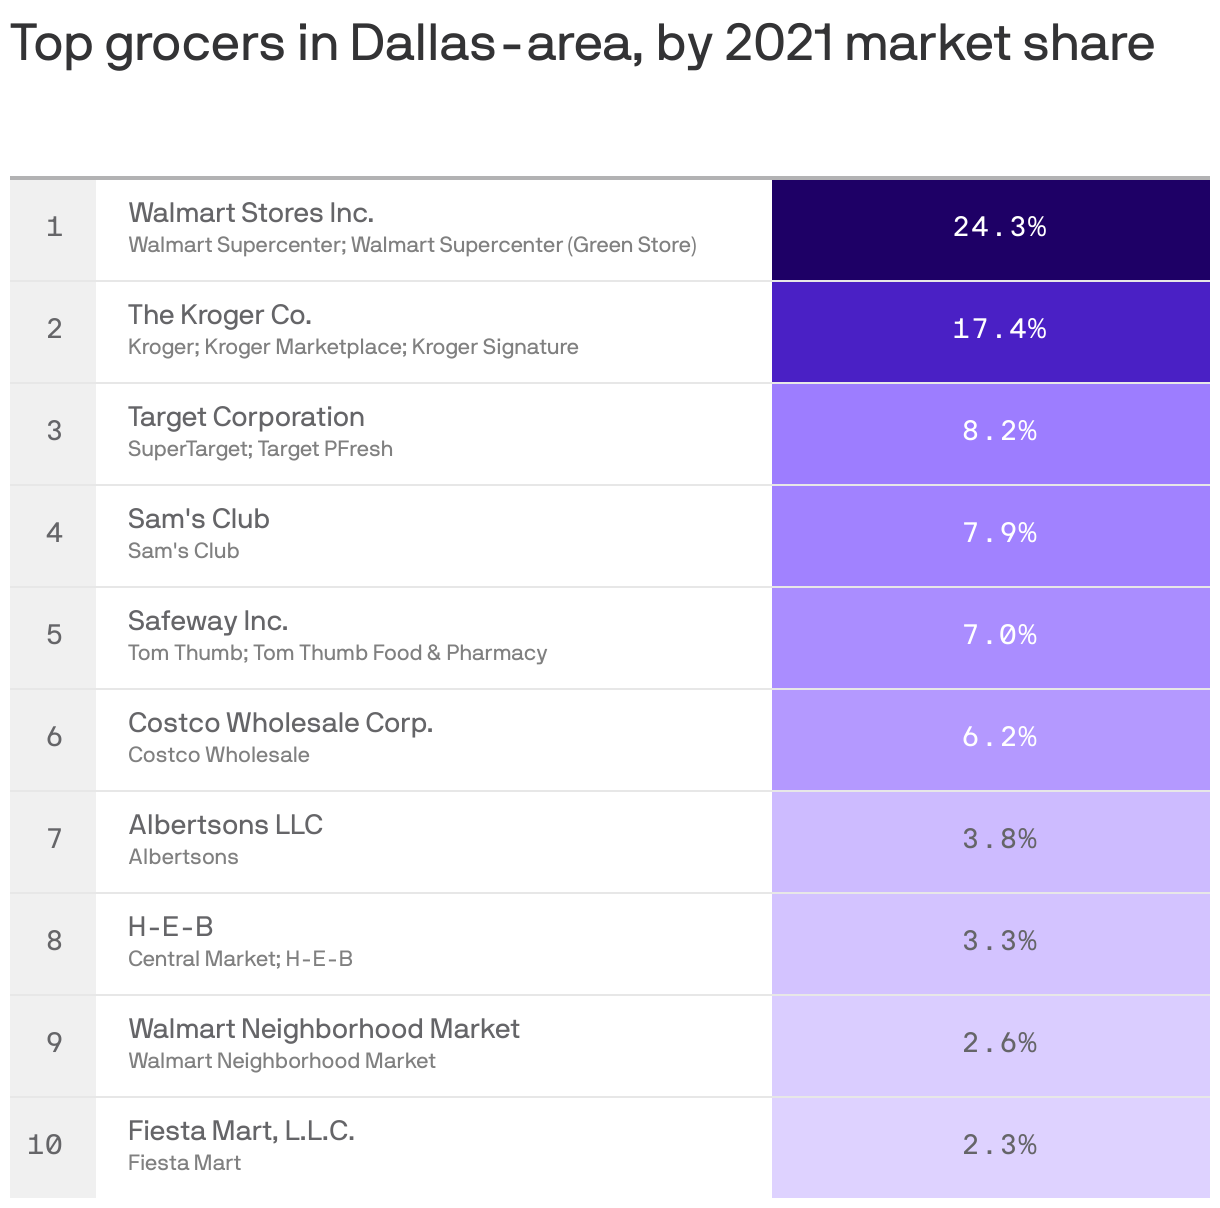 Top grocers in Dallas-area, by 2021 market share